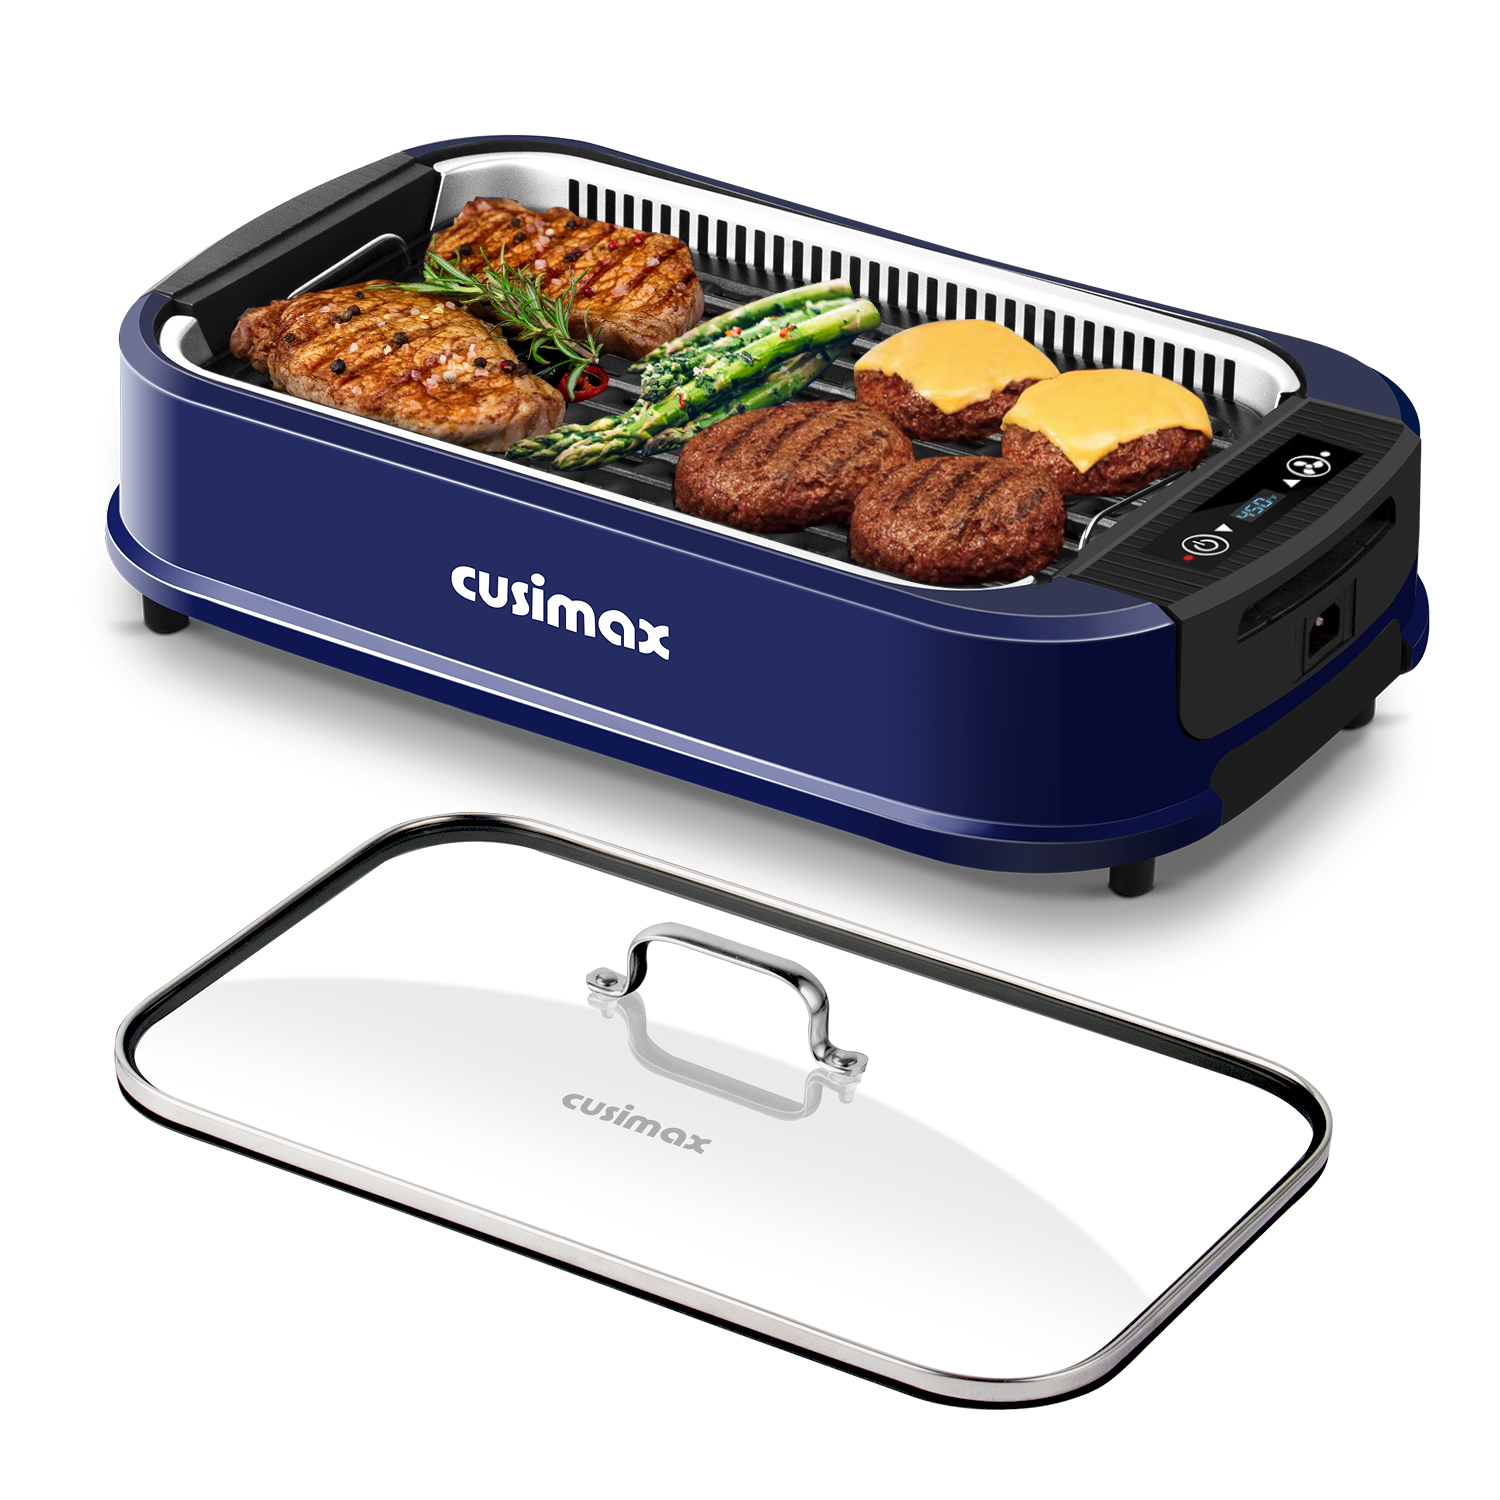 Cusimax Smokeless Indoor Grill Portable Electric Grill with Turbo Smoke Extractor Technology, Nonstick Removable Grill Pan, Glass Lid, 1500 Watts, Great for Homes and Party